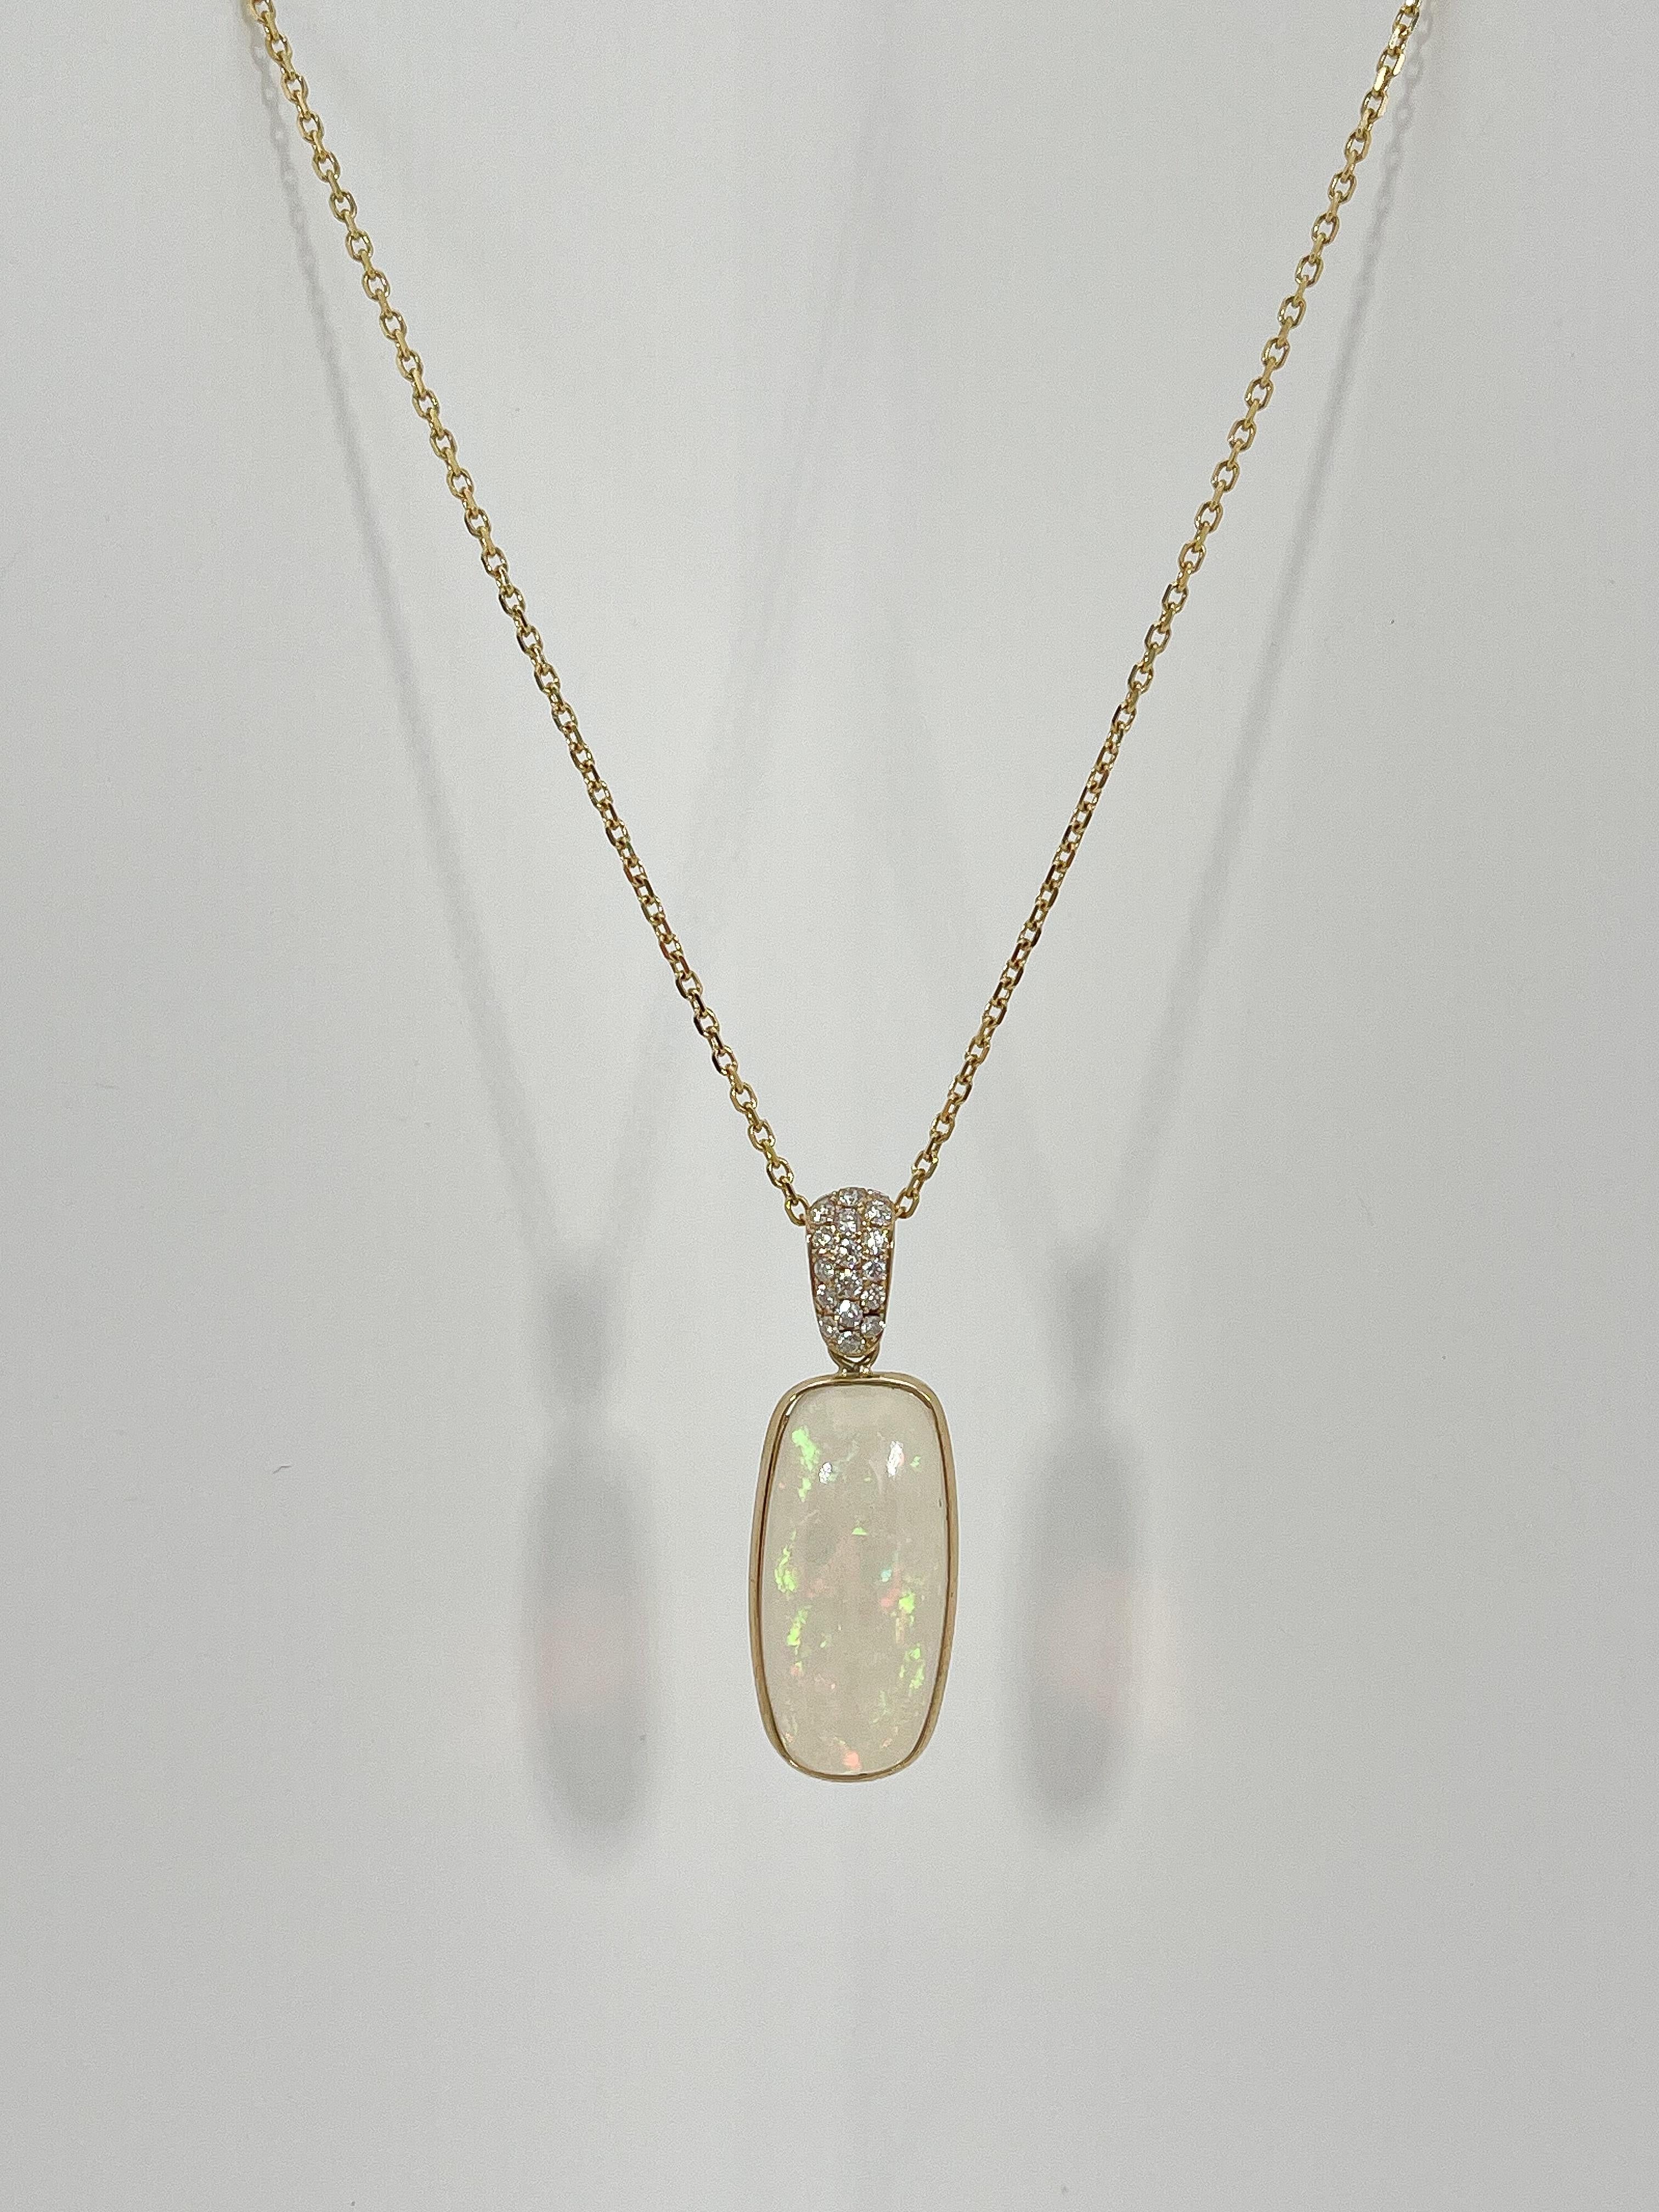 14k yellow gold opal and .22 CTW diamond pendant necklace. The diamonds on the bail are all round, the pendant measures 22 x 10 mm, has a length of 18 inches, and the necklace has a total weight of 4.8 grams.